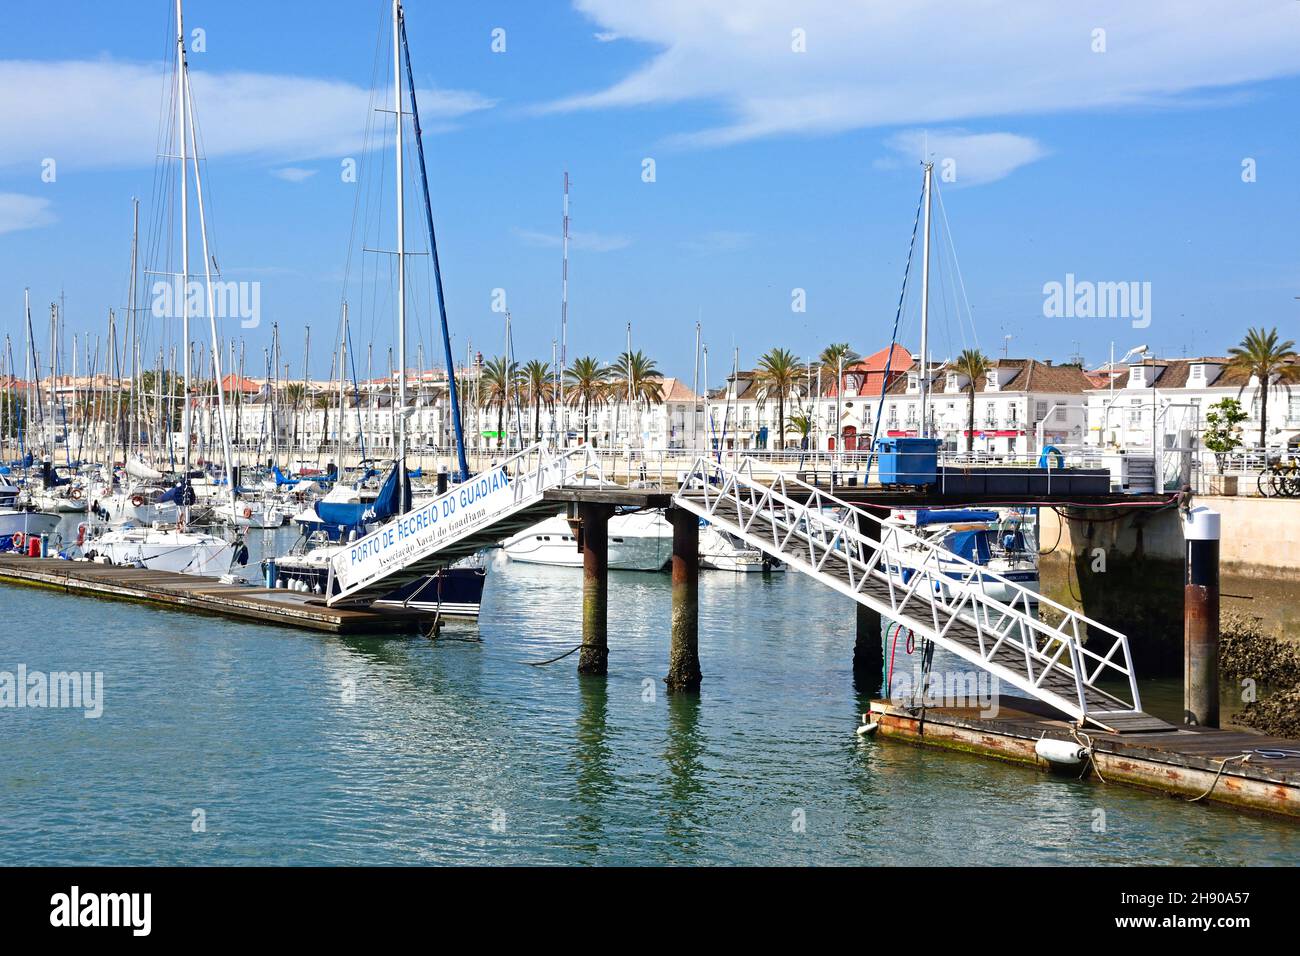 Yachts and boats moored in the marina with a footbridge in the foreground and waterfront buildings along the Avenida da Republica to the rear, Vila Re Stock Photo